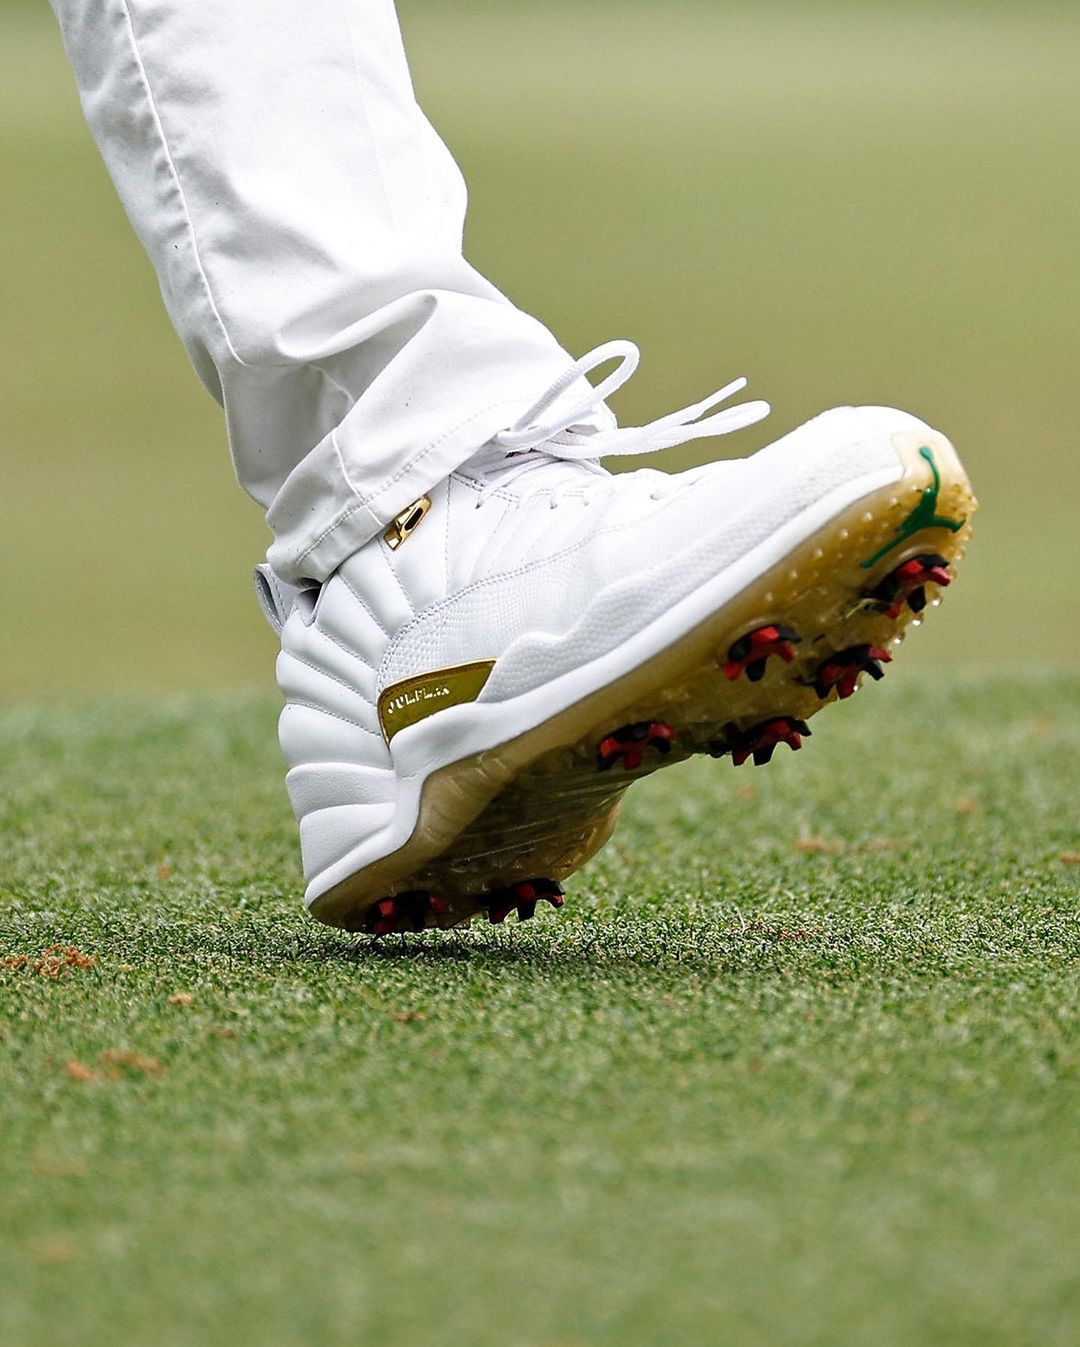 Tochi træ generation Male Spotted: HV3 is rocking these new Jordan golf shoes – GolfWRX